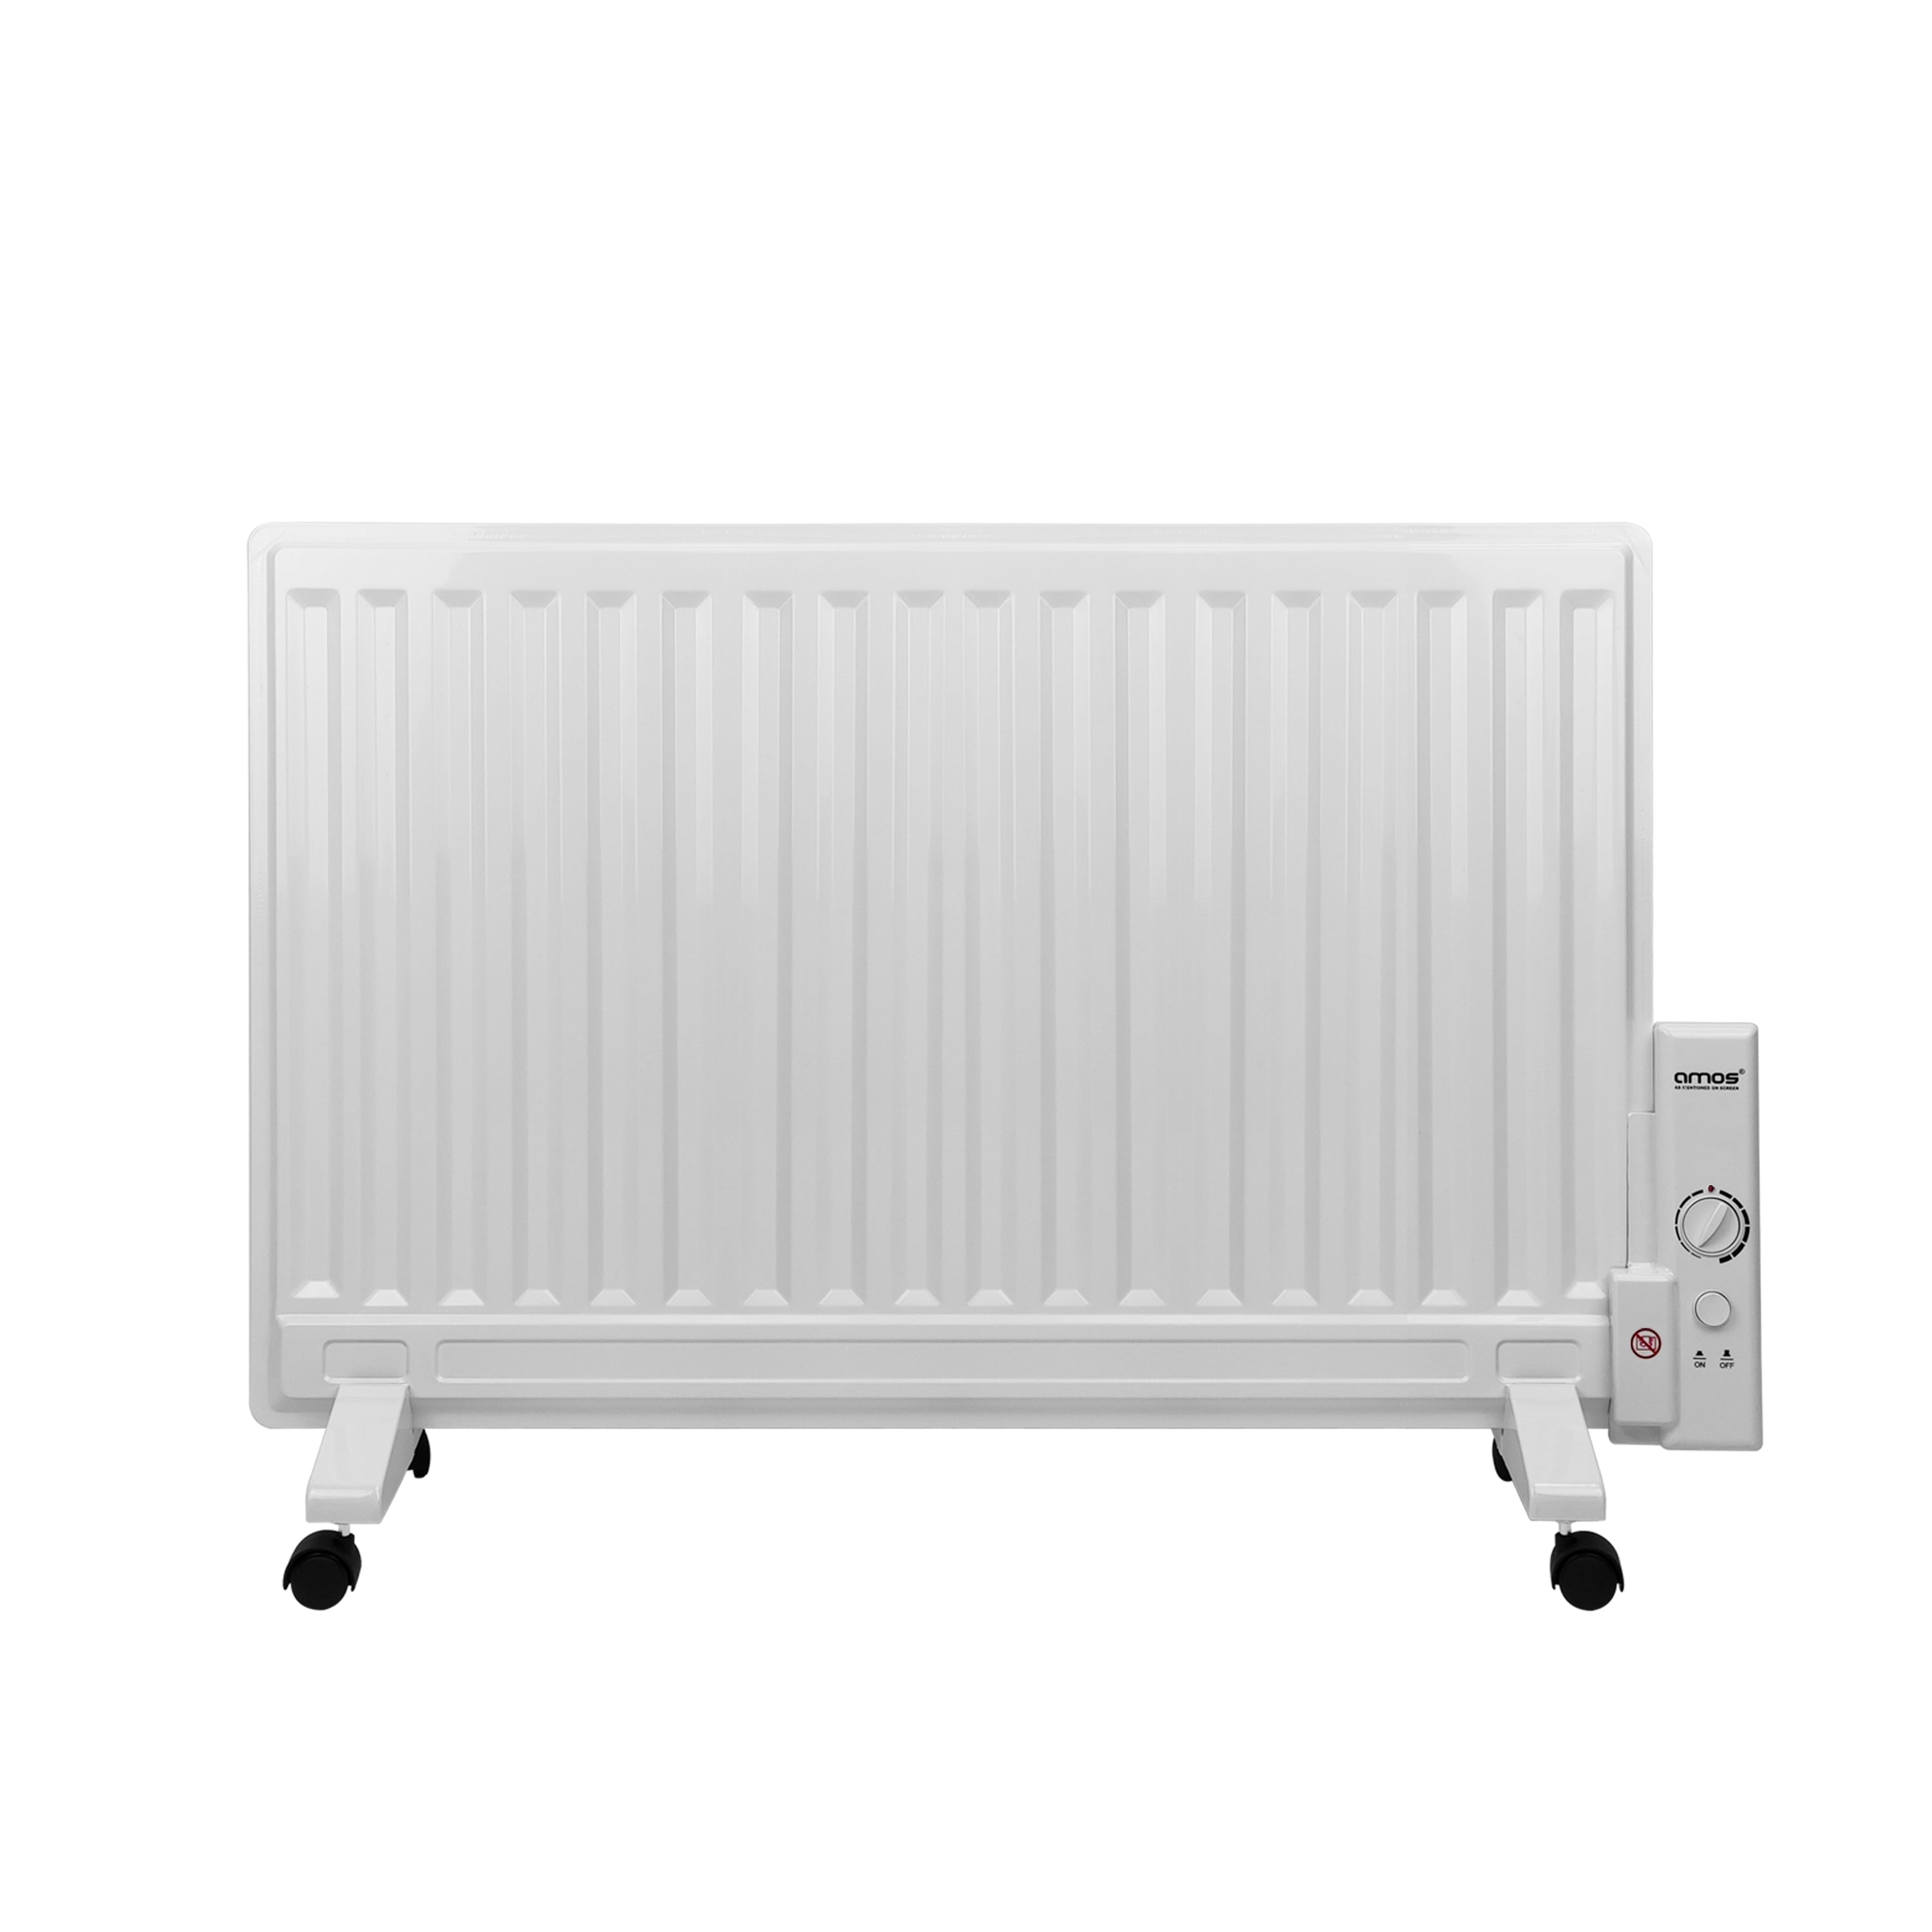 AMOS 1000W Oil Filled Panel Heater